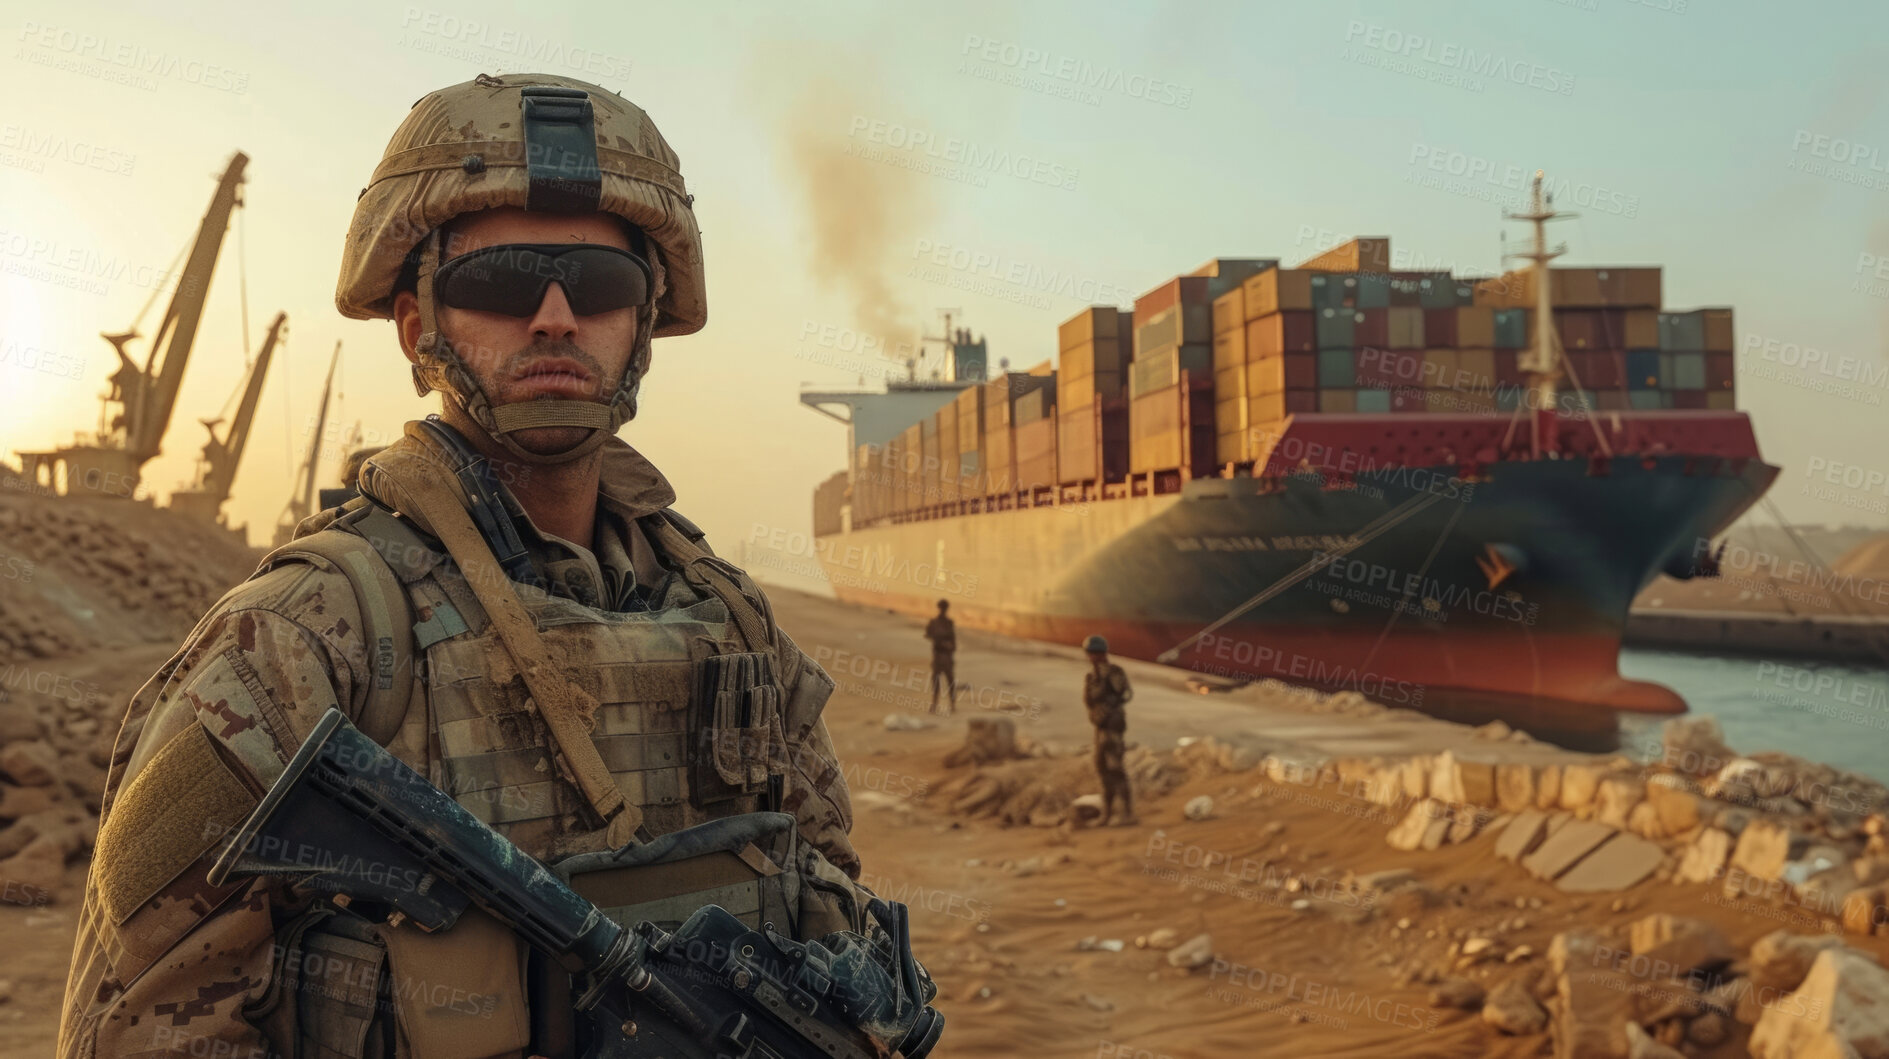 Buy stock photo Cargo ship, soldier and container for Security, transport, and economics. Canal, safety and military for global delivery. Goods, services and stock for distribution to international market.